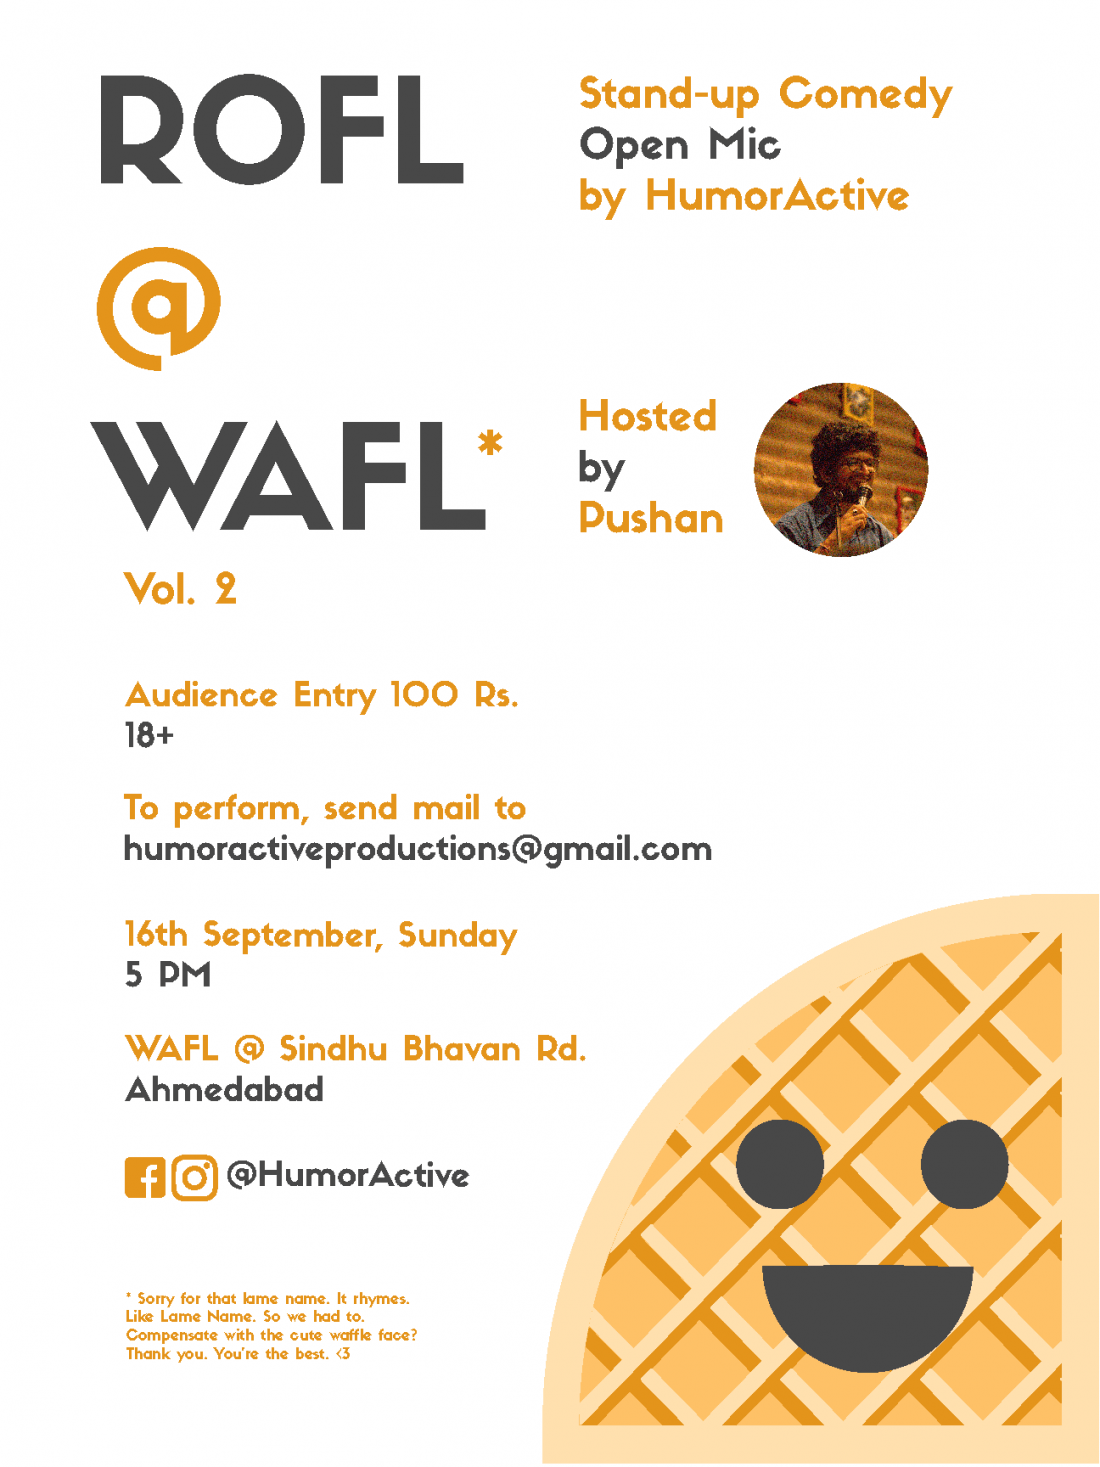 ROFL at WAFL Vol. 2 - Stand-up Comedy Open Mic